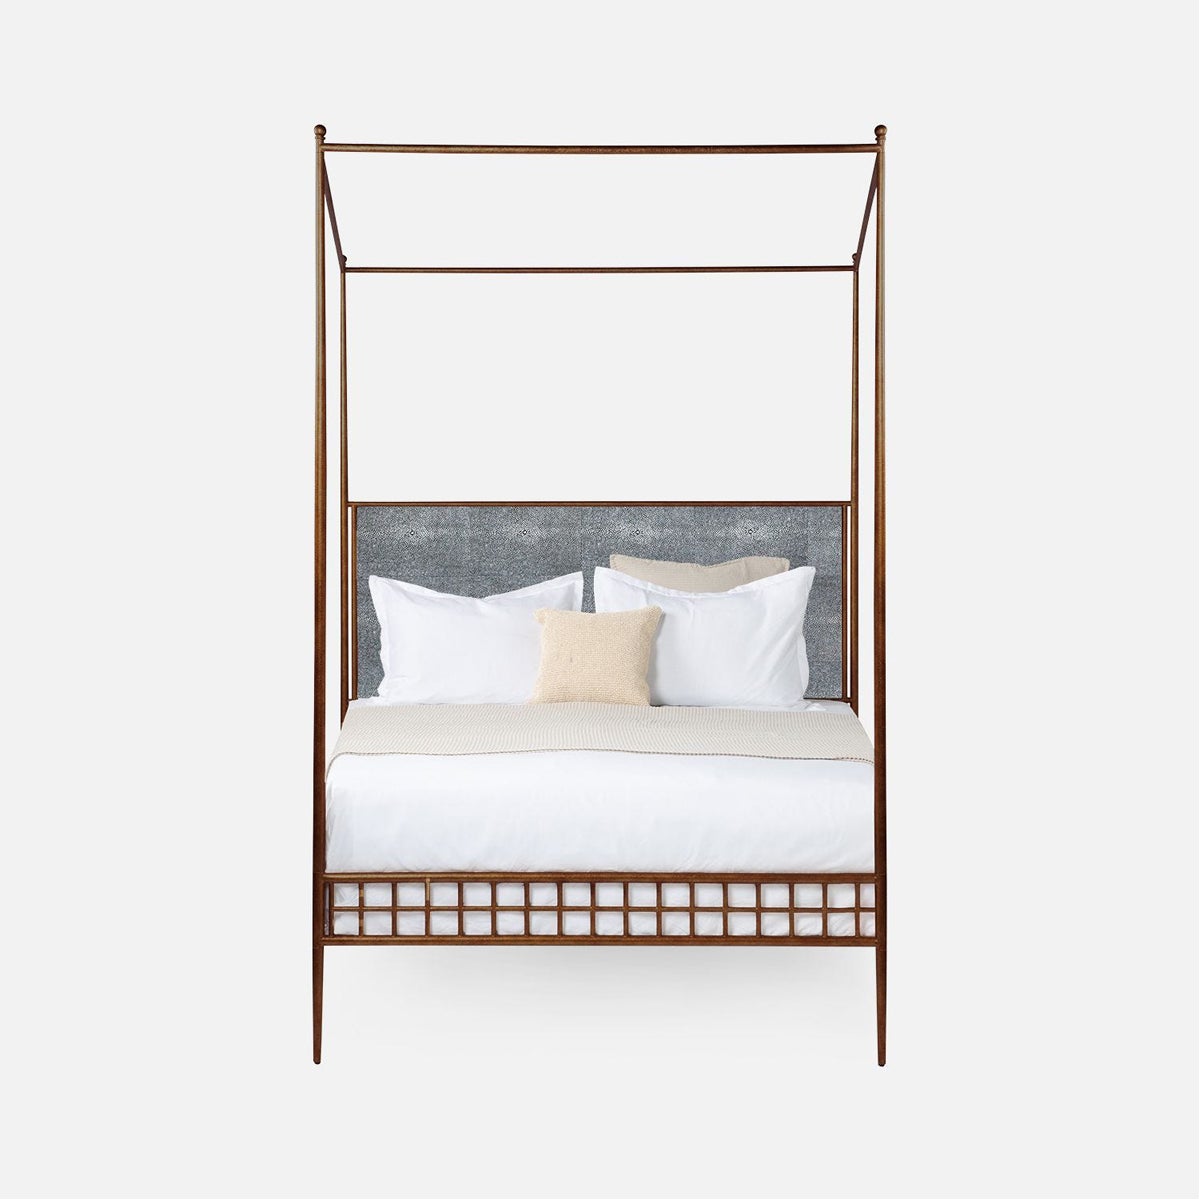 Made Goods Hamilton Textured Iron Canopy Bed in Emerald Shell